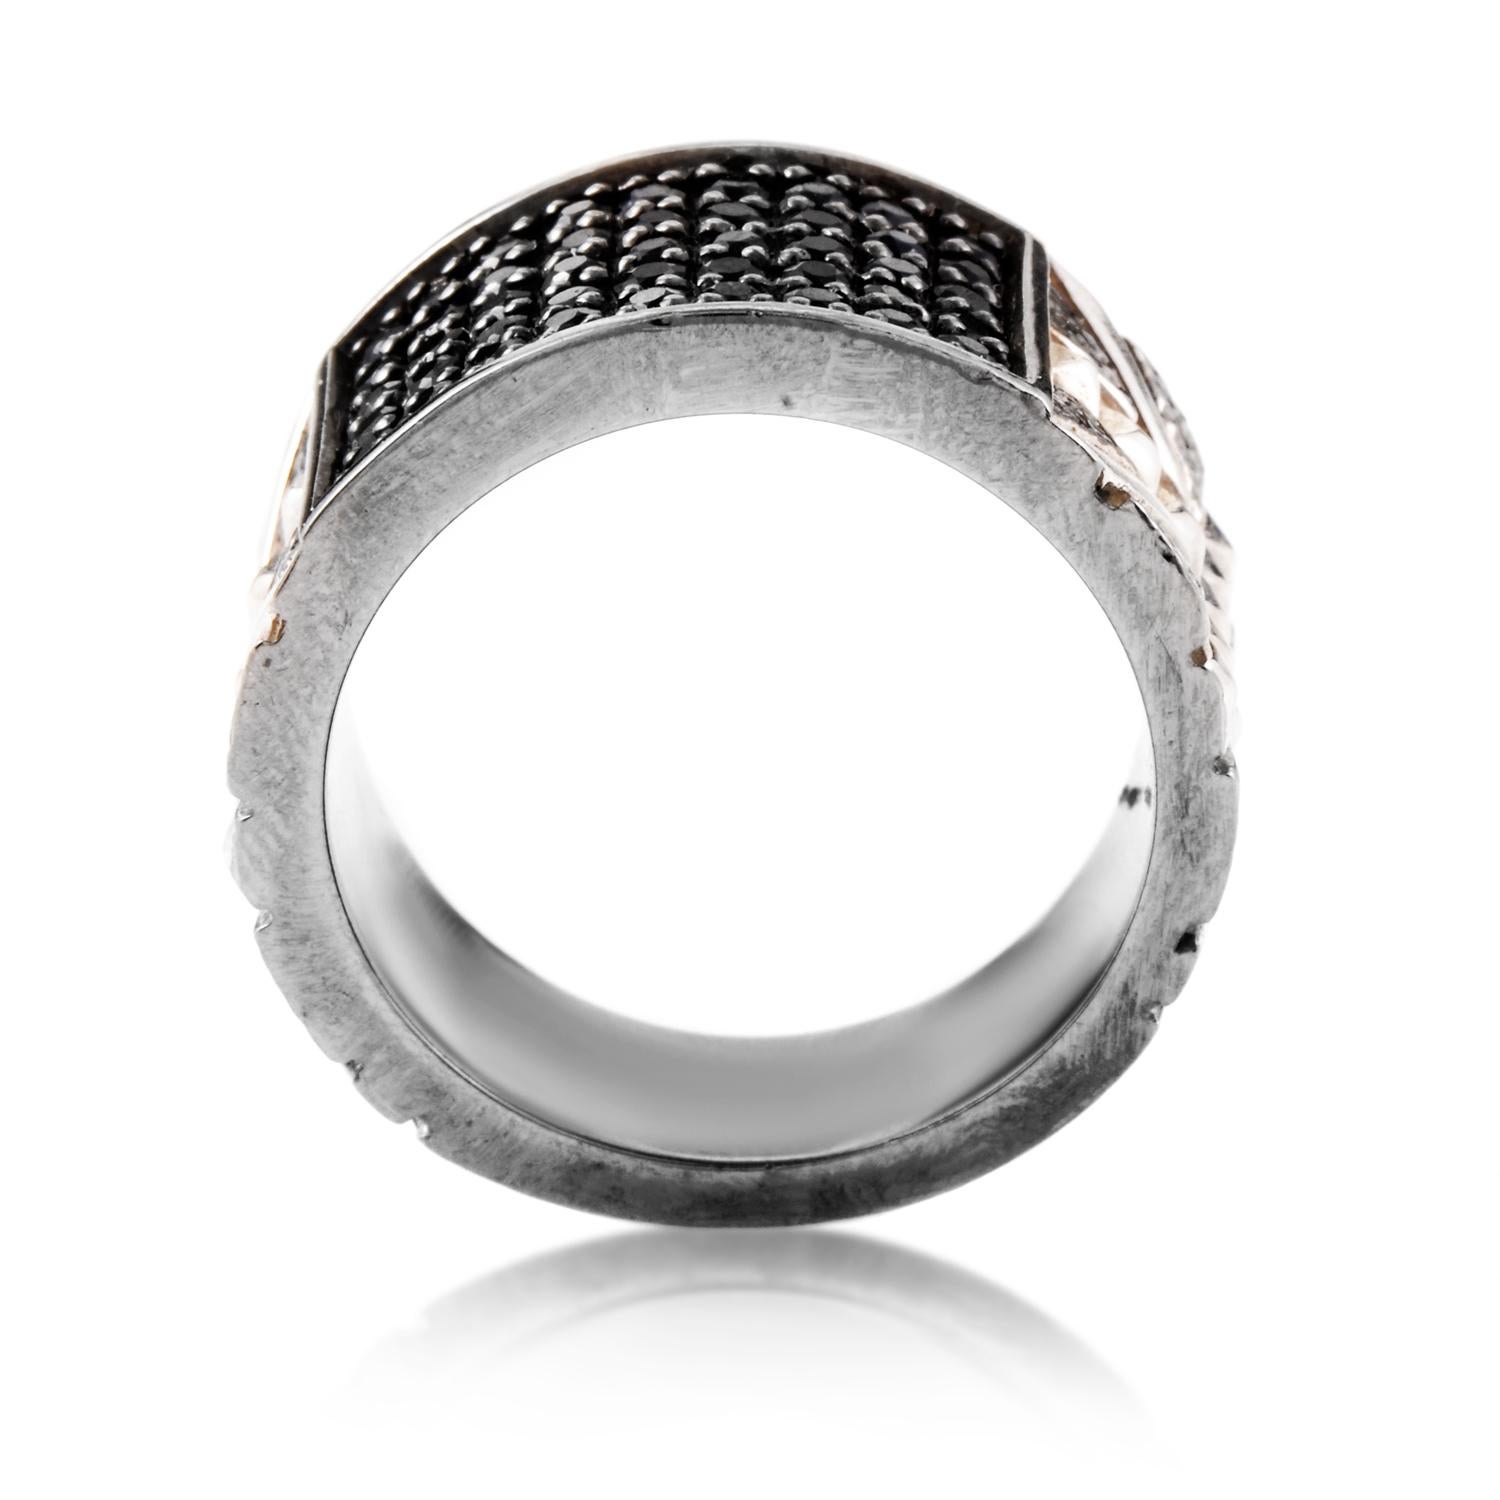 This marvelous ring boasts attractive offbeat appeal and exemplary materials, offering an exceptionally bold, masculine appearance. The ring is made of exquisite silver and weighs 15 grams. The ring is presented by Stephen Webster and designed for